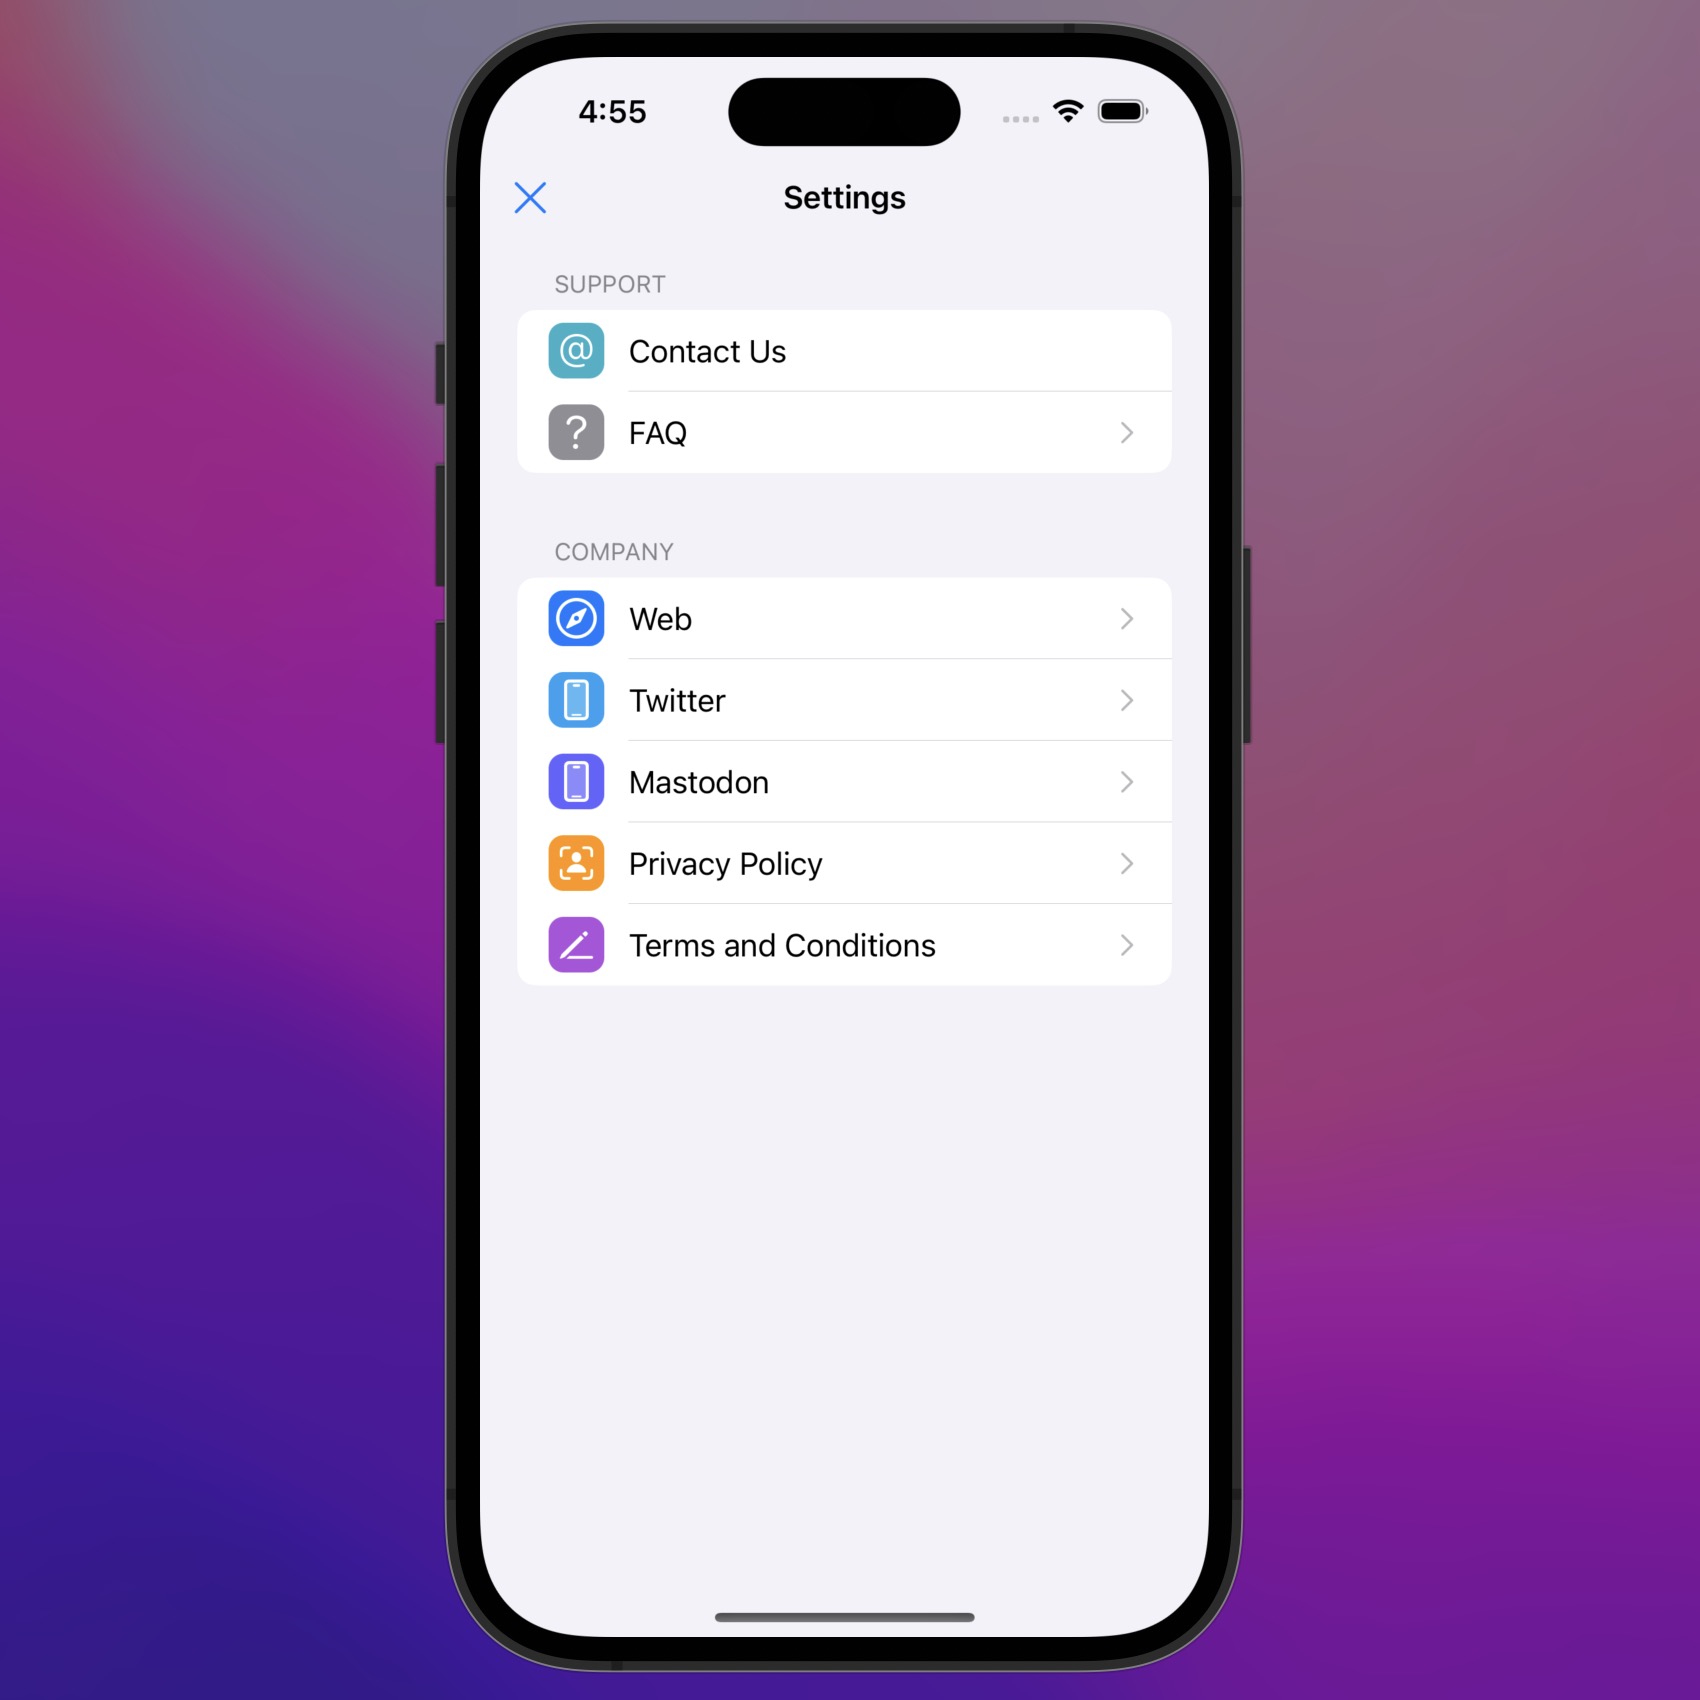 SwiftUI Subscription settings screen layout.